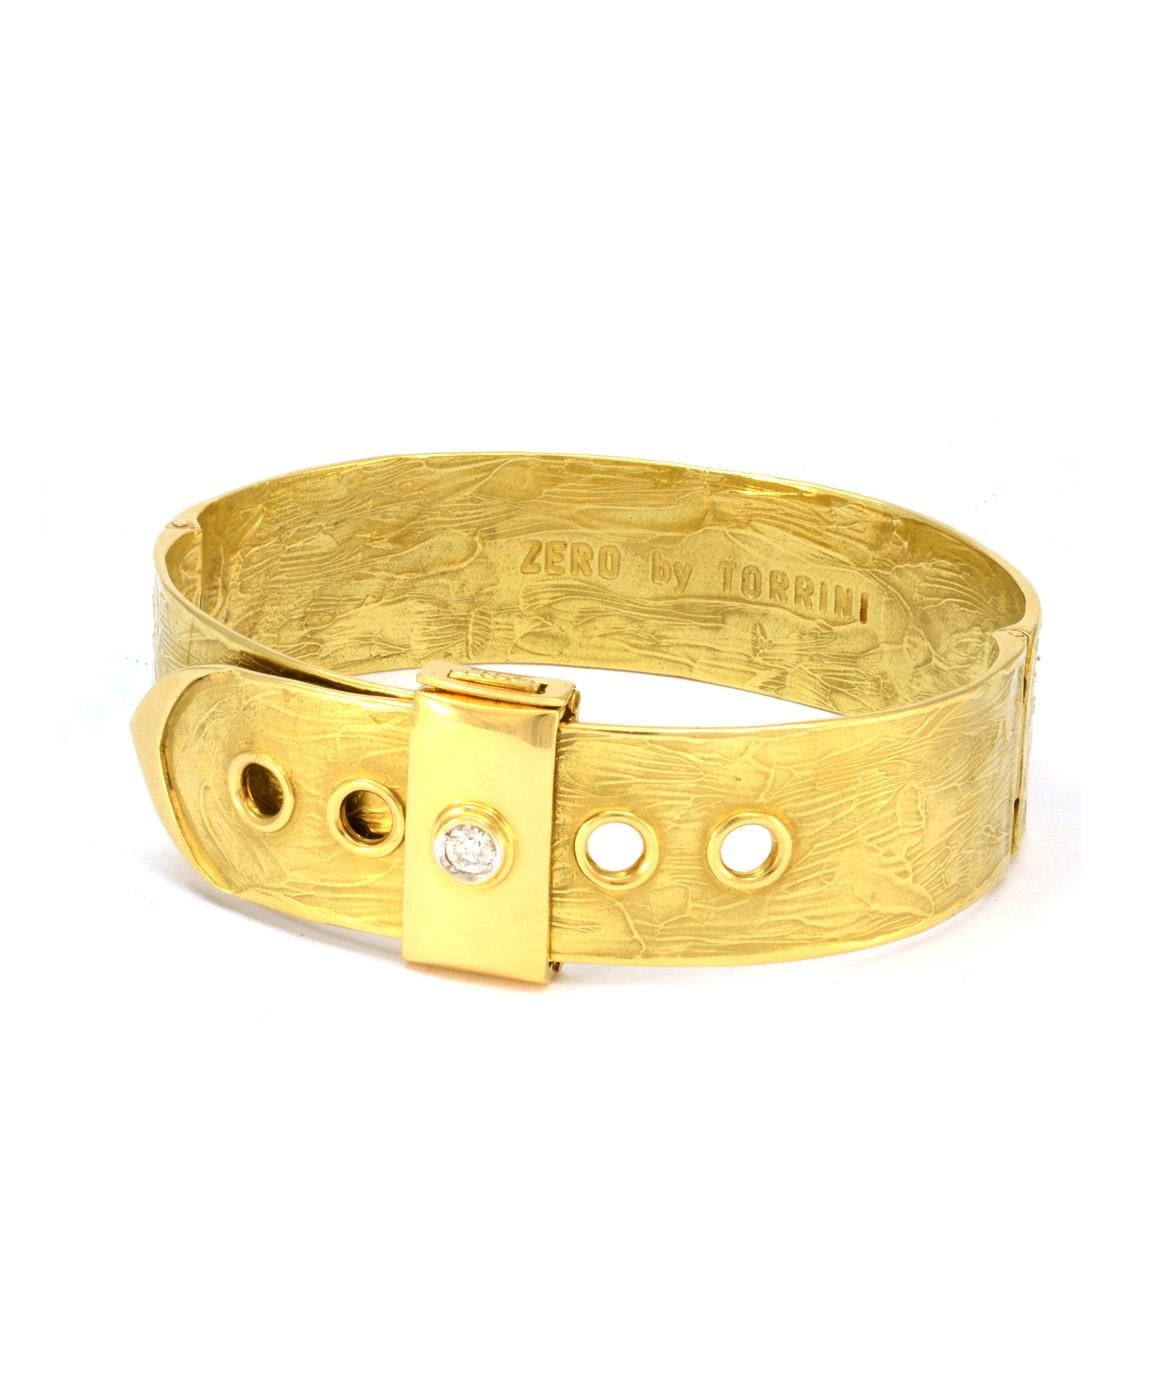 This 100% authentic Zero by Torrini diamond and solid 18k yellow gold bracelet is in excellent condition! With a belt style design, this bracelet can be clasped in multiple different spots allowing it to be adjustable. The textured design of the